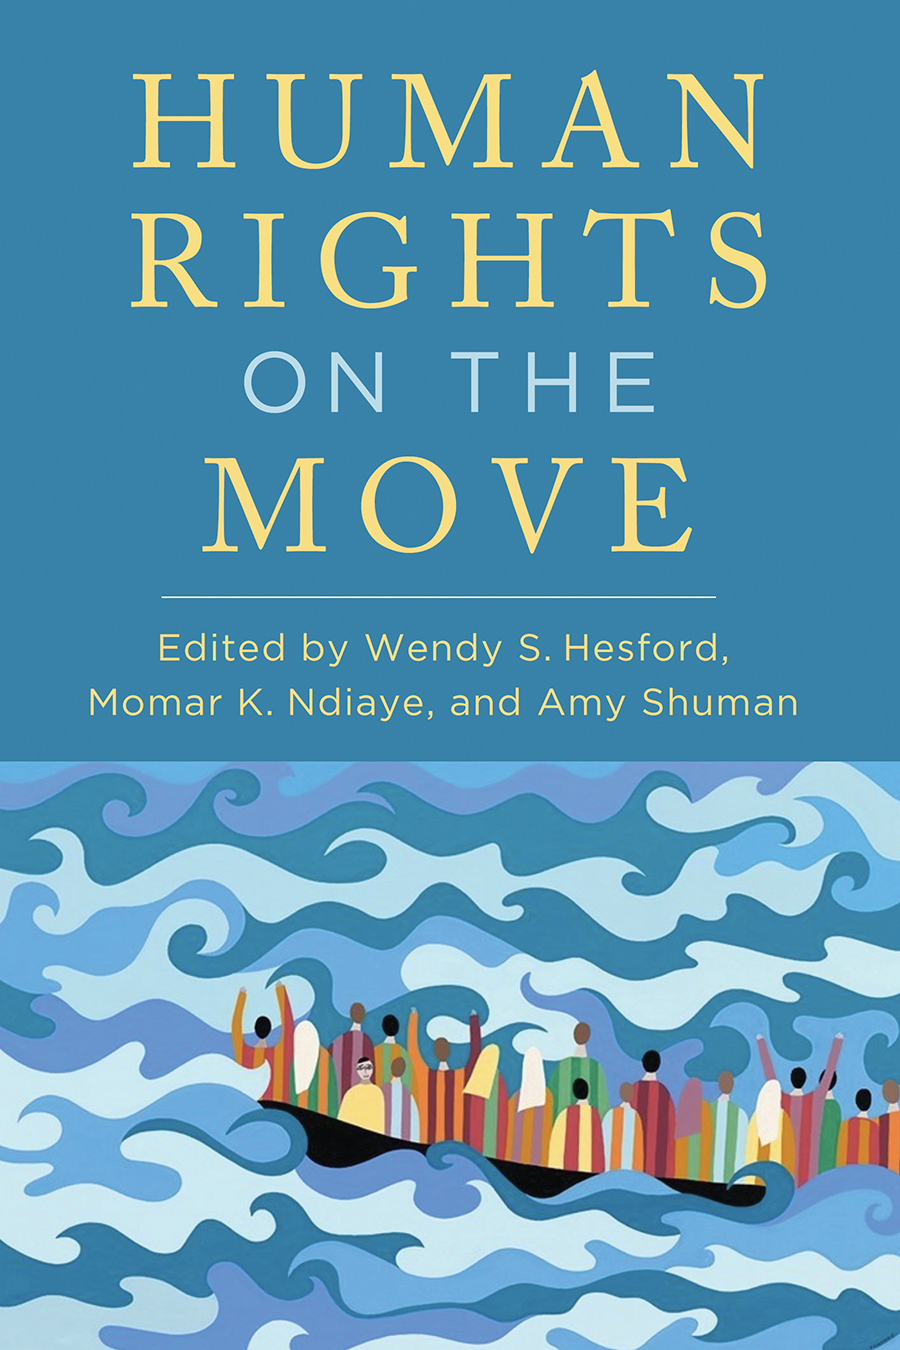 Front cover of Human Rights on the Move, edited by Wendy S. Hesford, Momar K. Ndiaye, and Amy Shuman, featuring stylized, colorful figures in a boat floating amid churning waves.